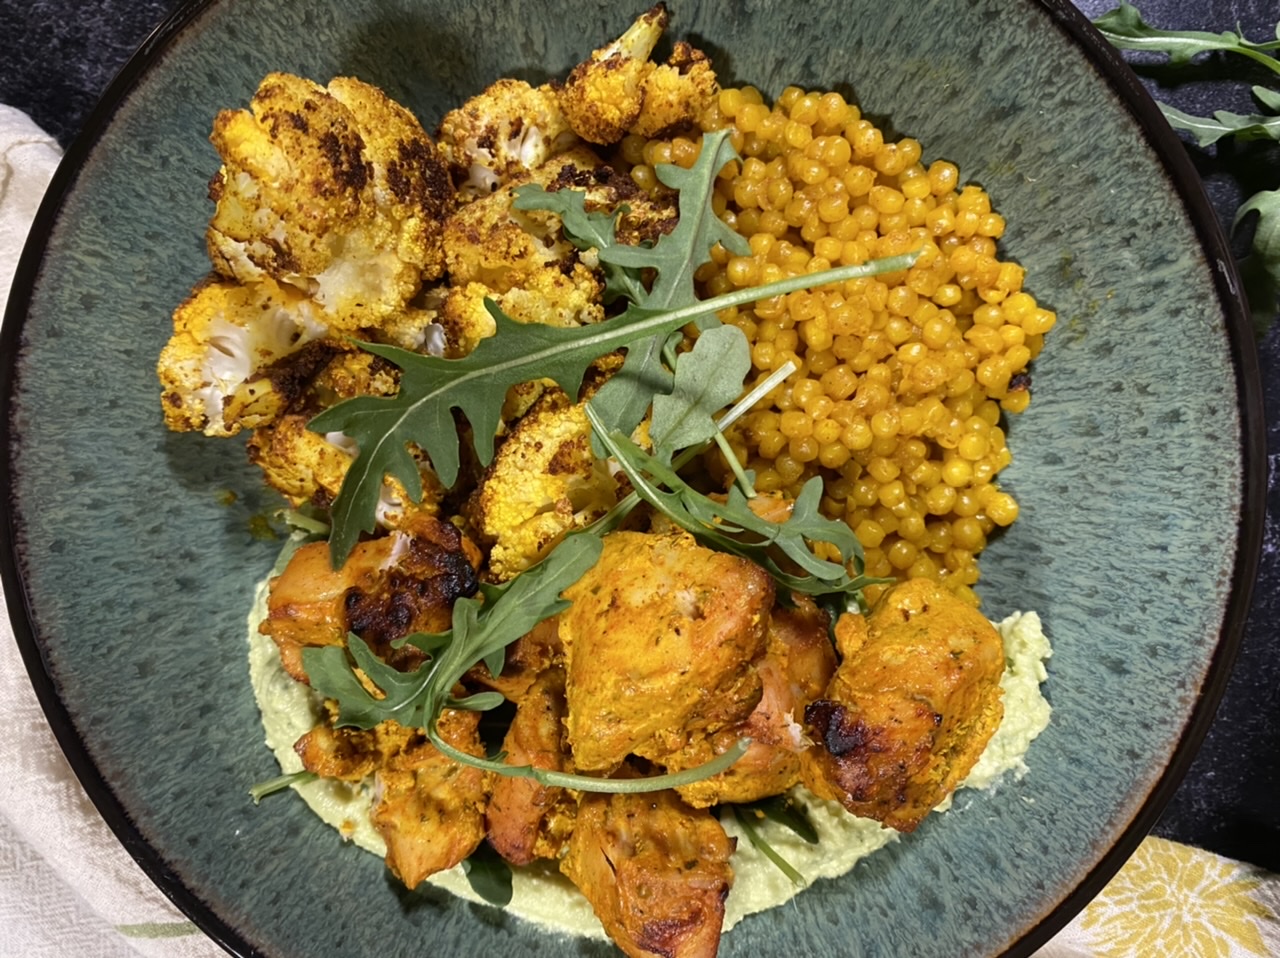 4D7CF6B9 8CAB 4AB1 9D5B 30A2C36406A2 - Moroccan-Style Chicken “Shawarma” with Golden Cauliflower, Turmeric Pearl Couscous, & Whipped Avocado Feta